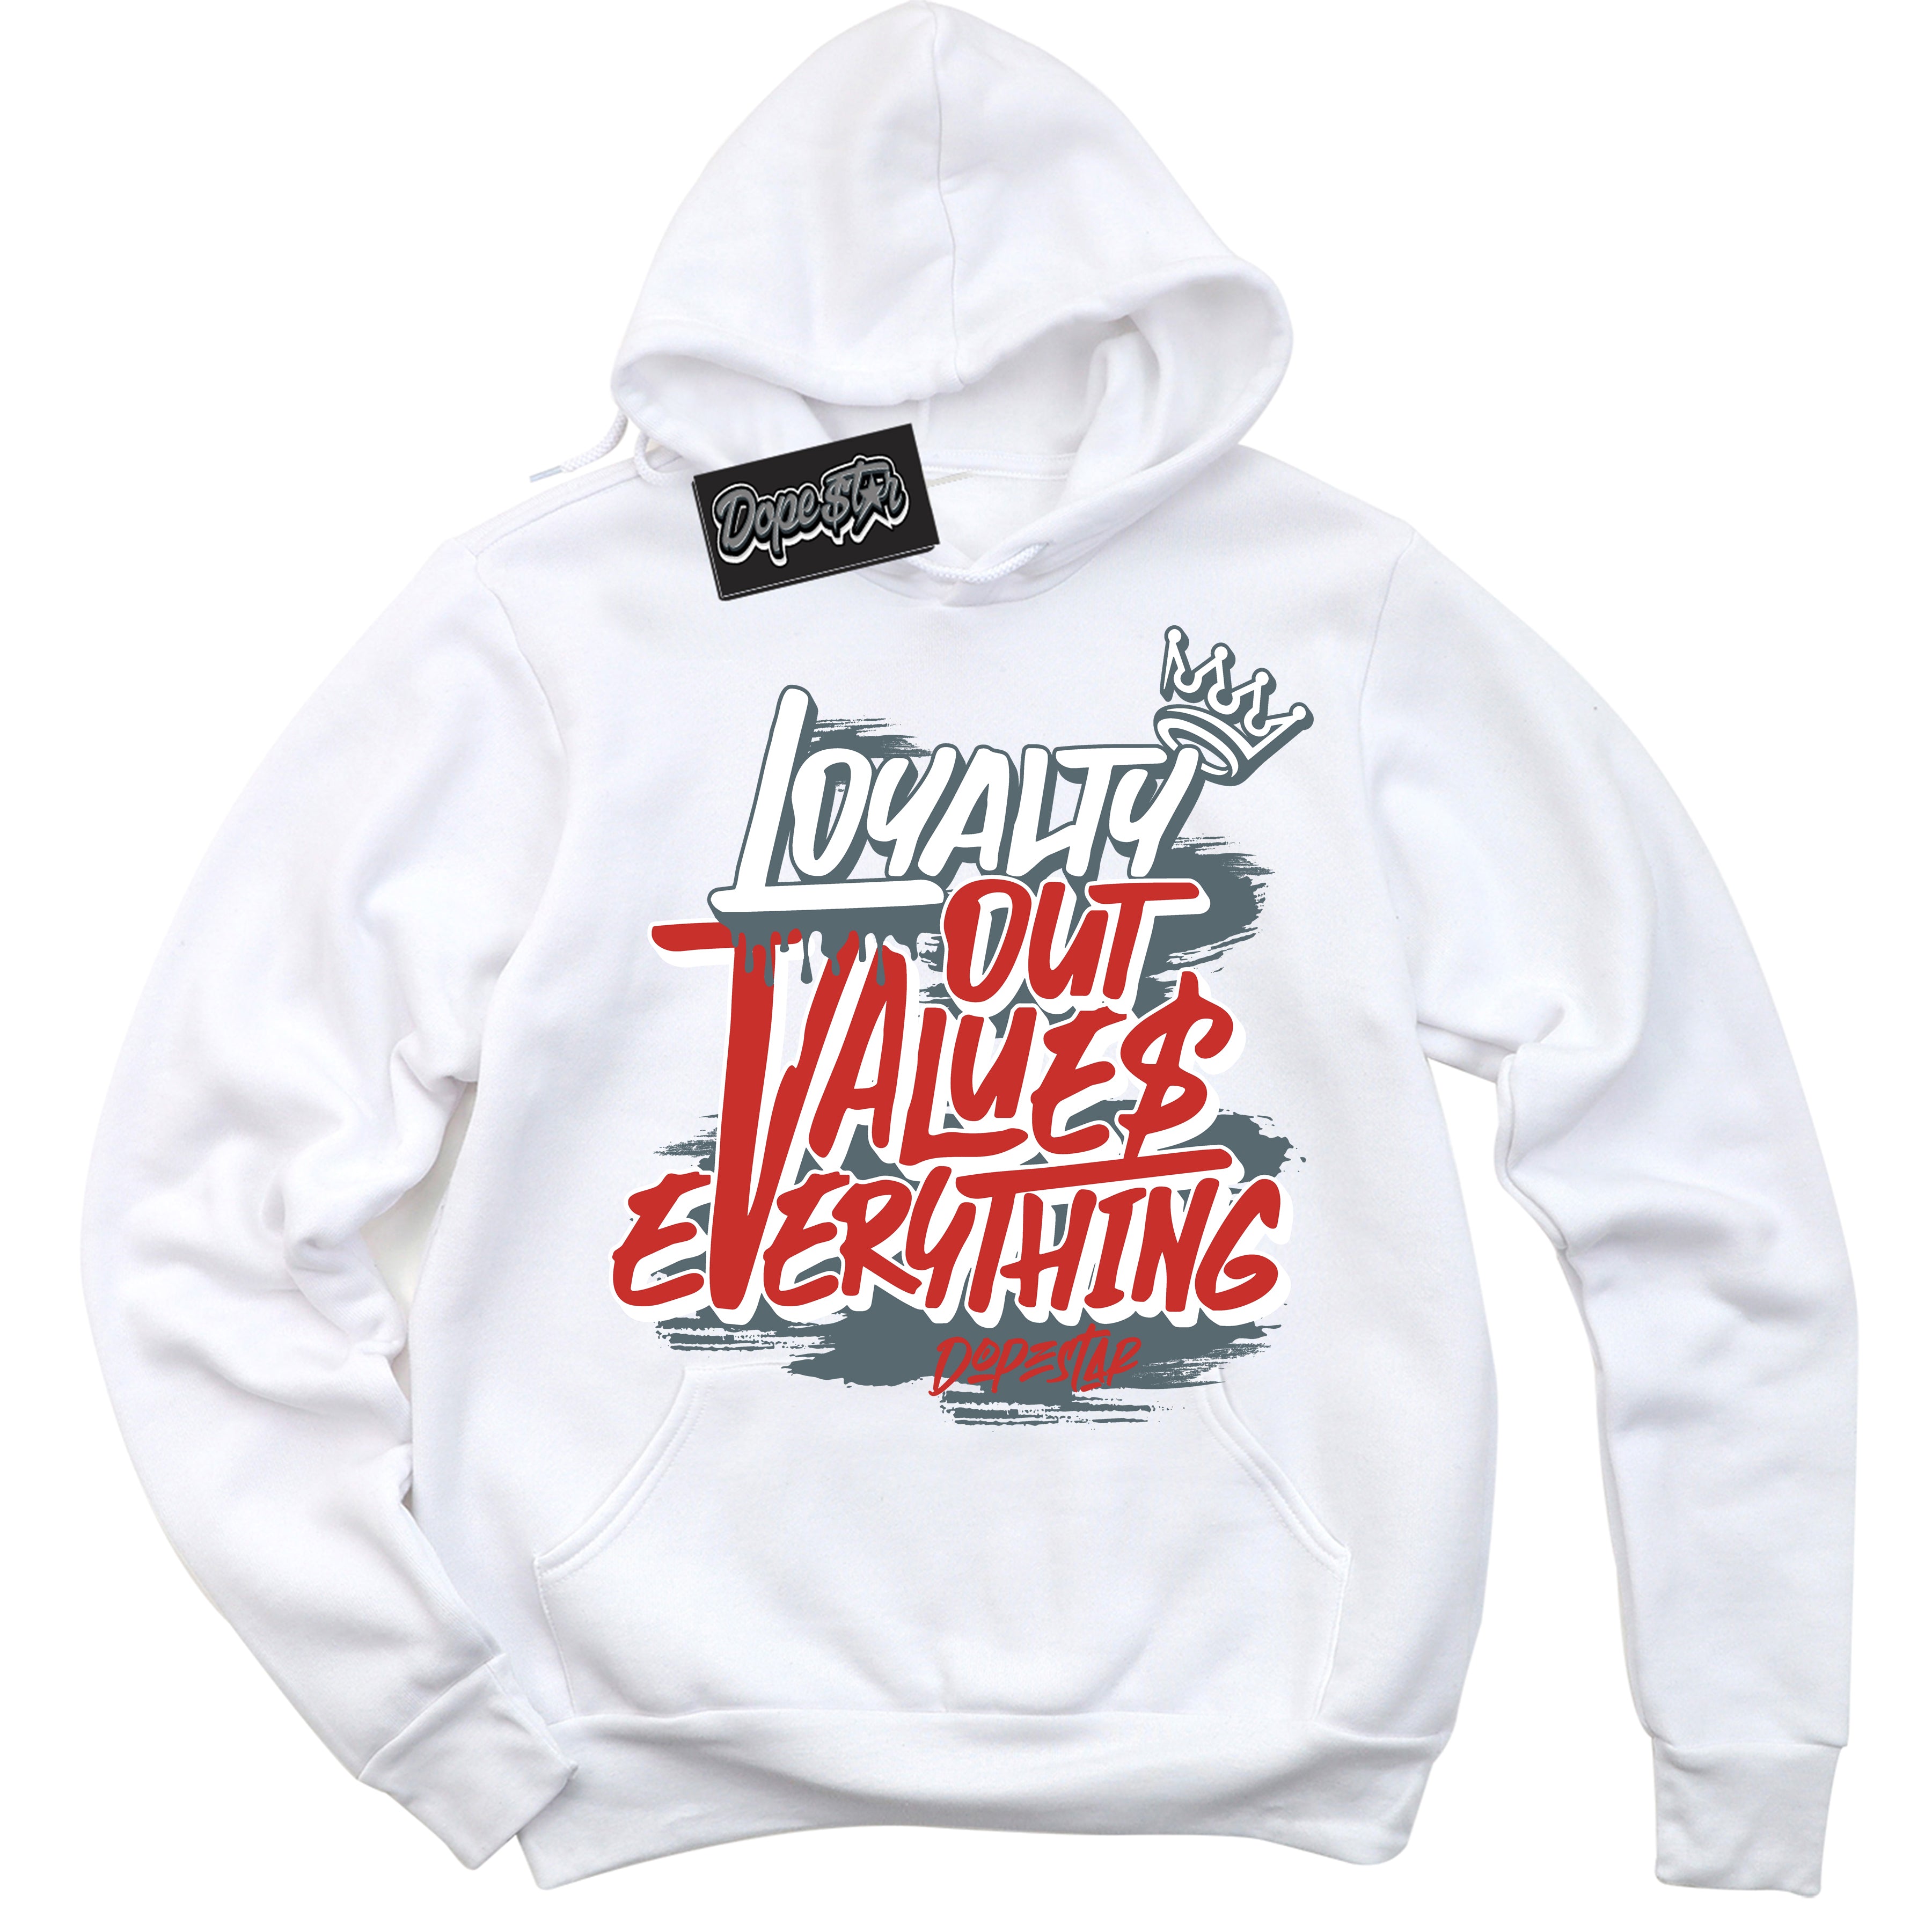 Cool White Hoodie with “ Loyalty Out Values Everything ”  design that Perfectly Matches Red Fire 9s Sneakers.